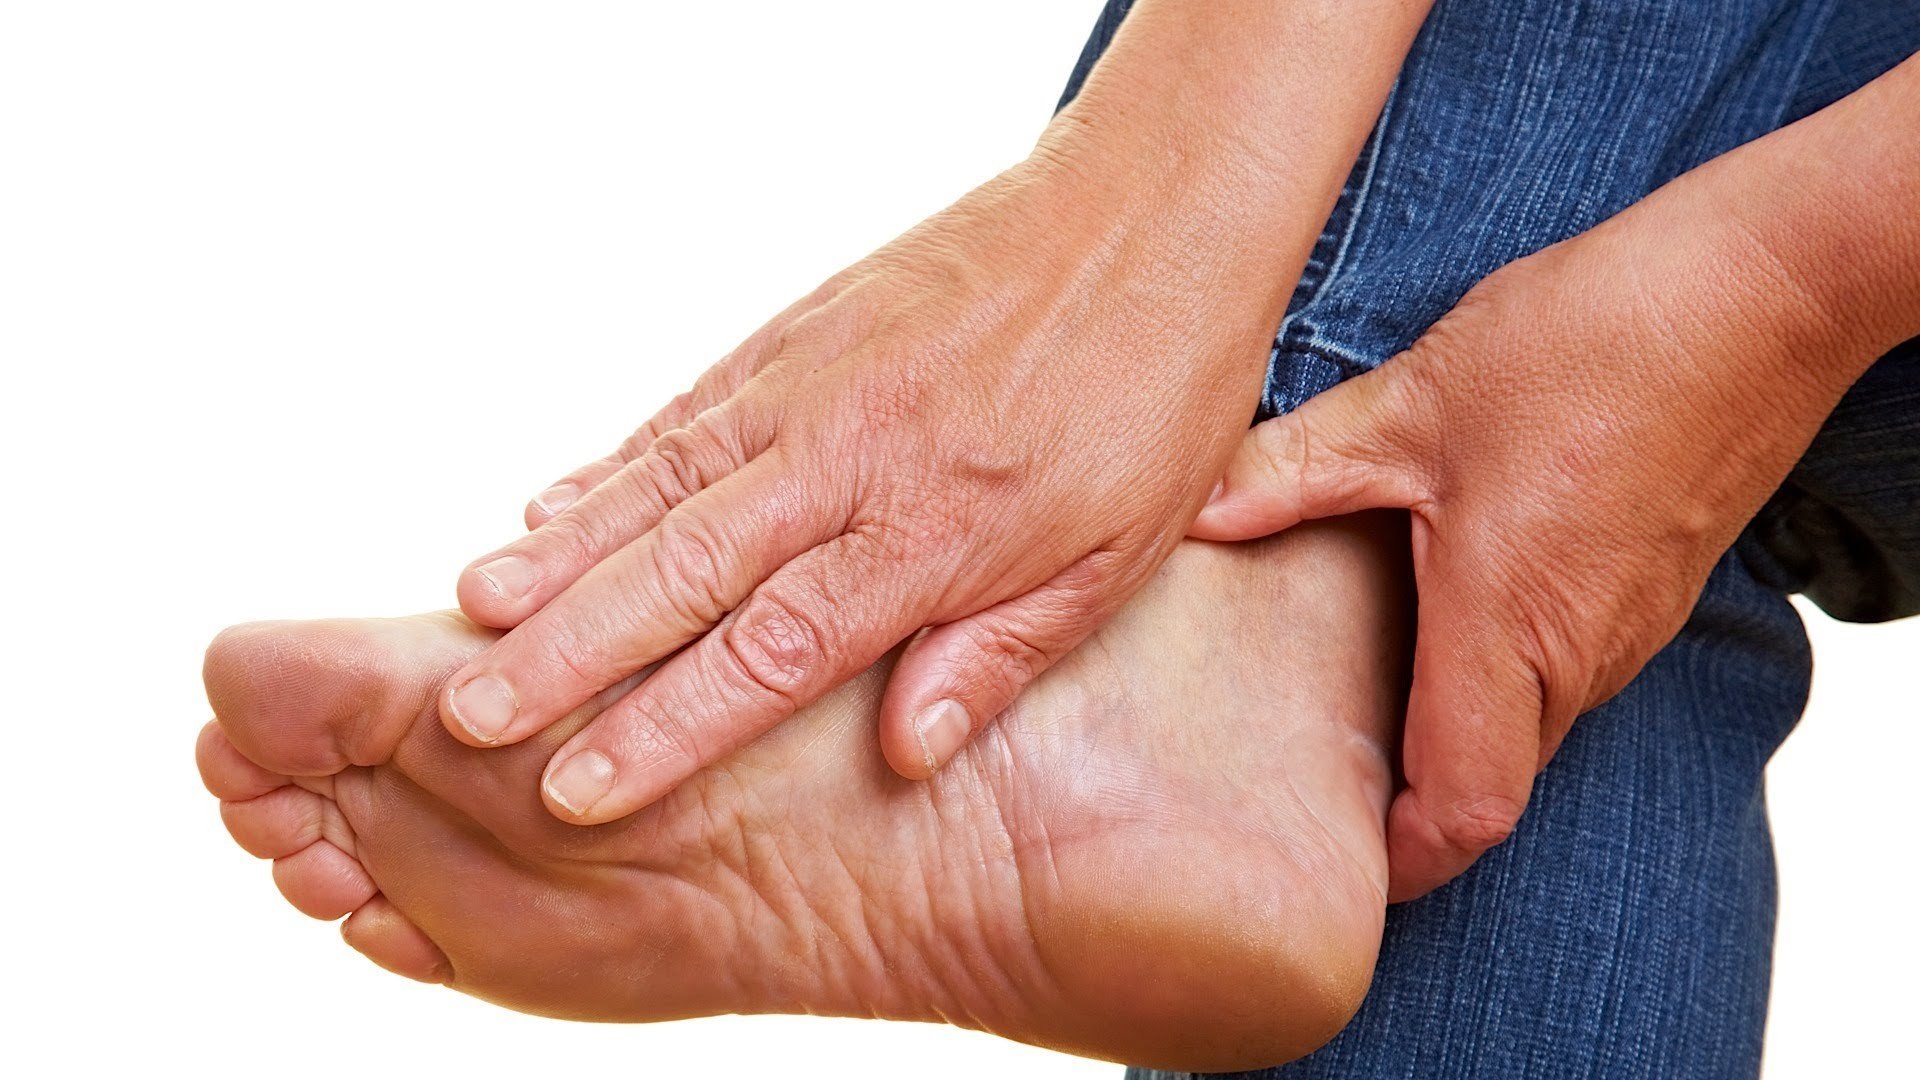 How to Prevent &  Treat Gout, Foot Care